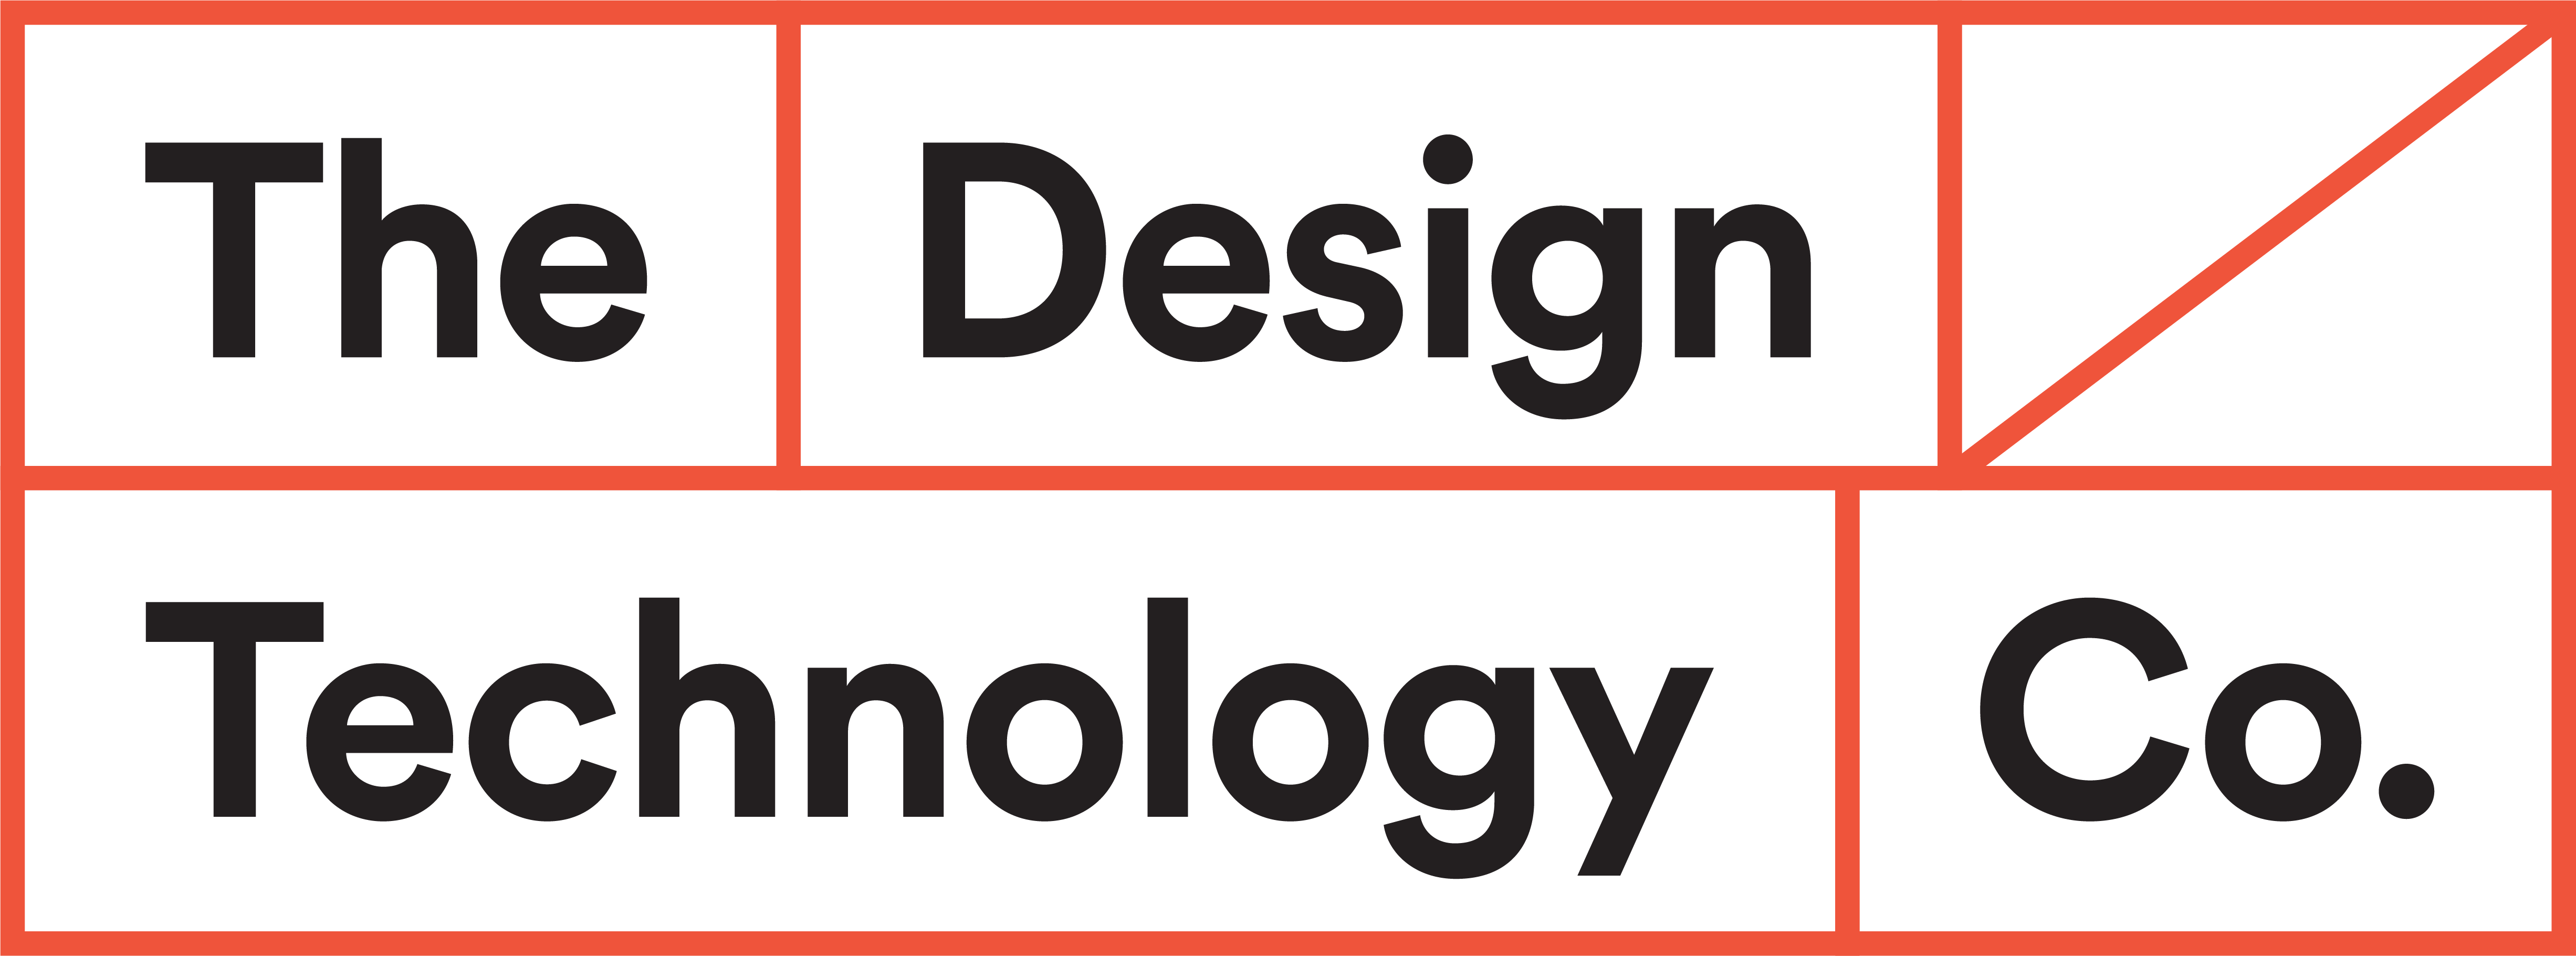 The Design Technology Co.